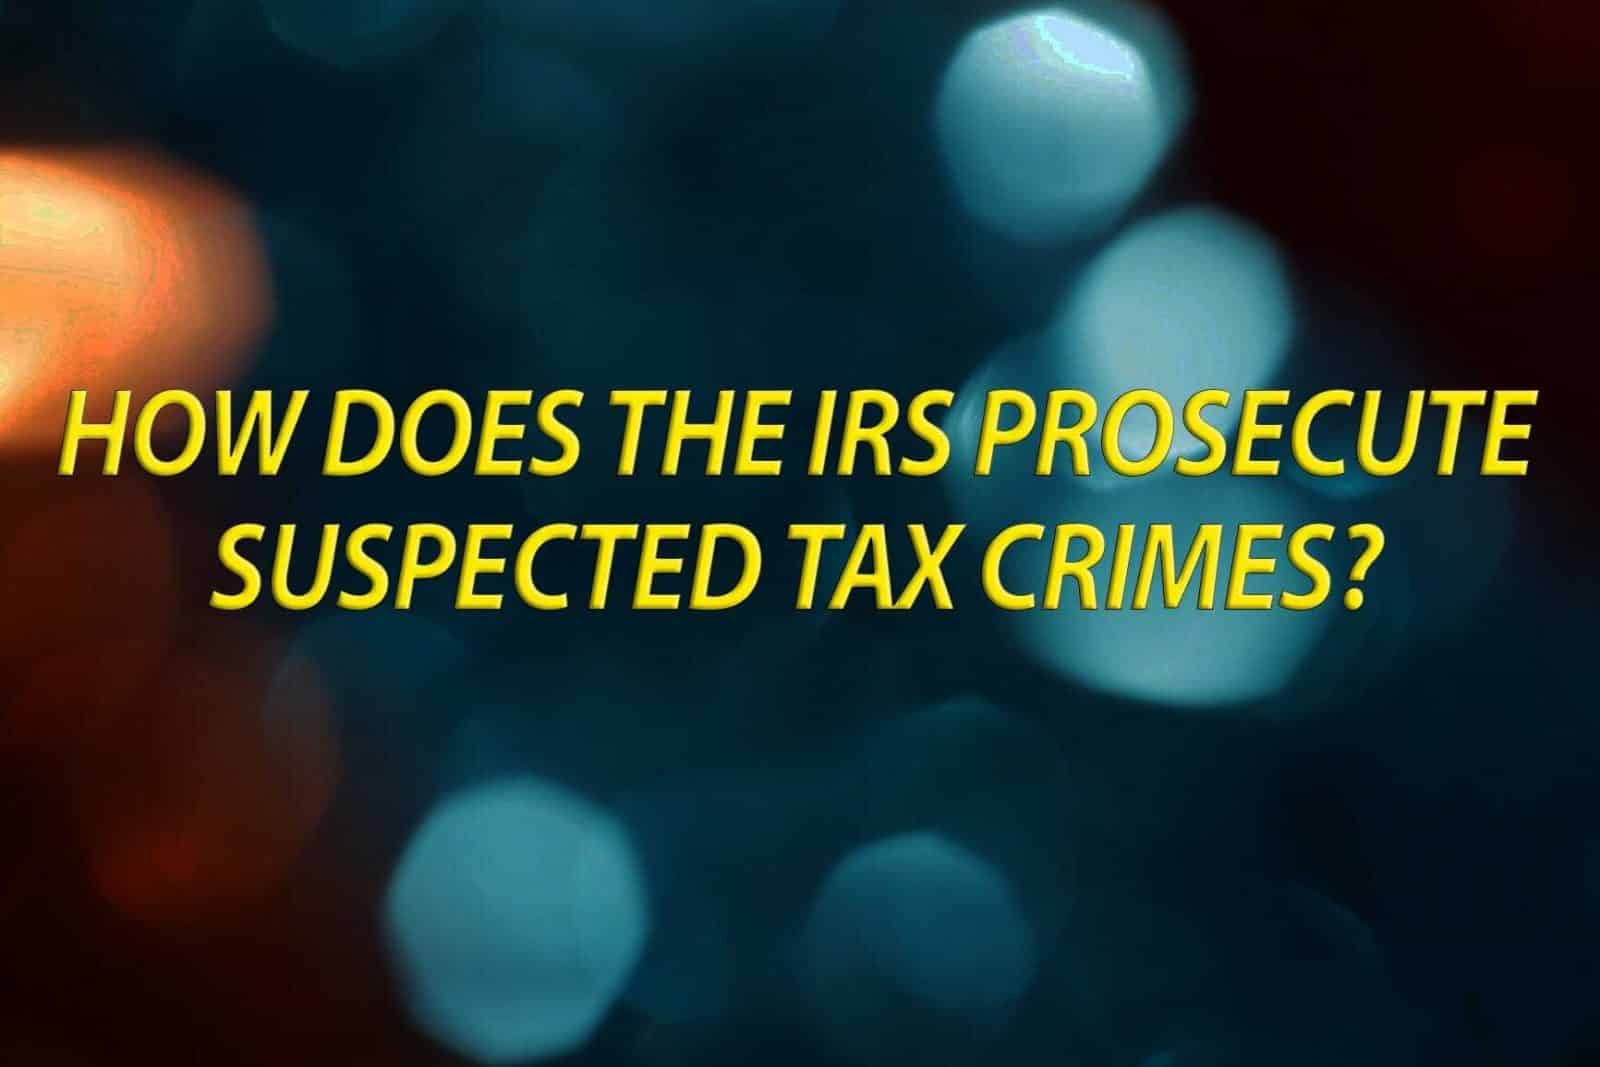 How does the IRS prosecute suspected tax crimes